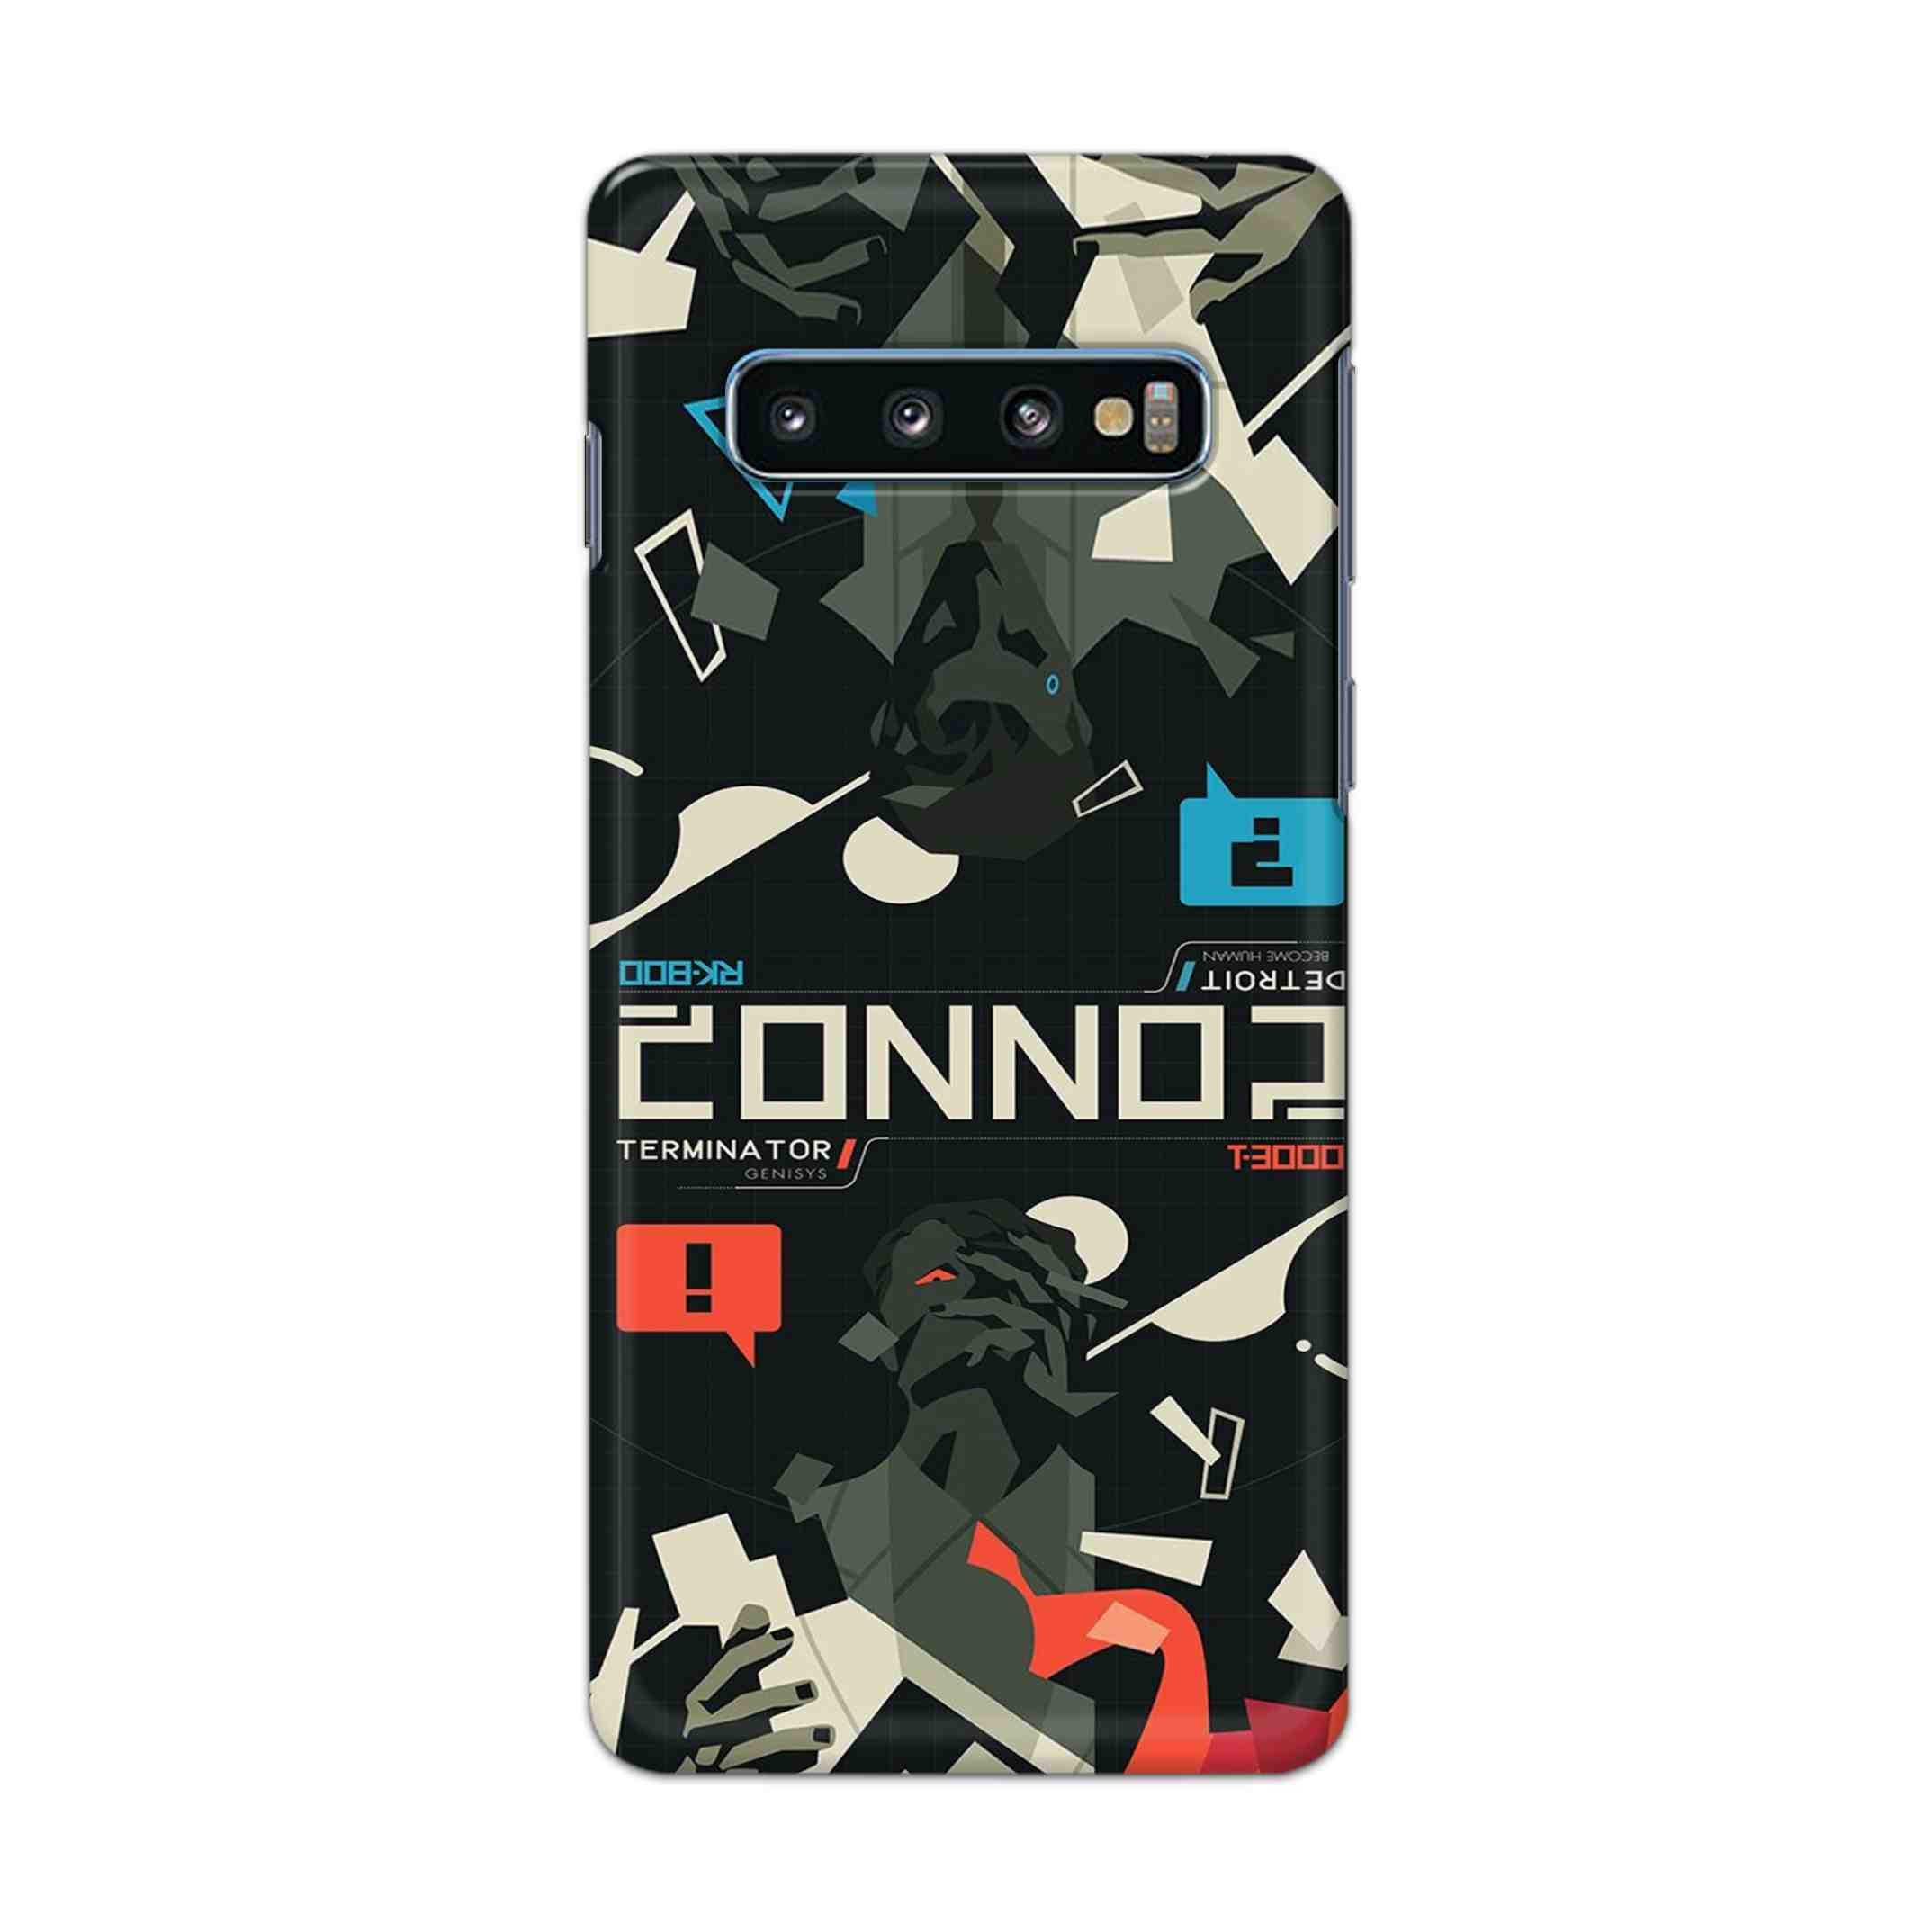 Buy Terminator Hard Back Mobile Phone Case Cover For Samsung Galaxy S10 Online